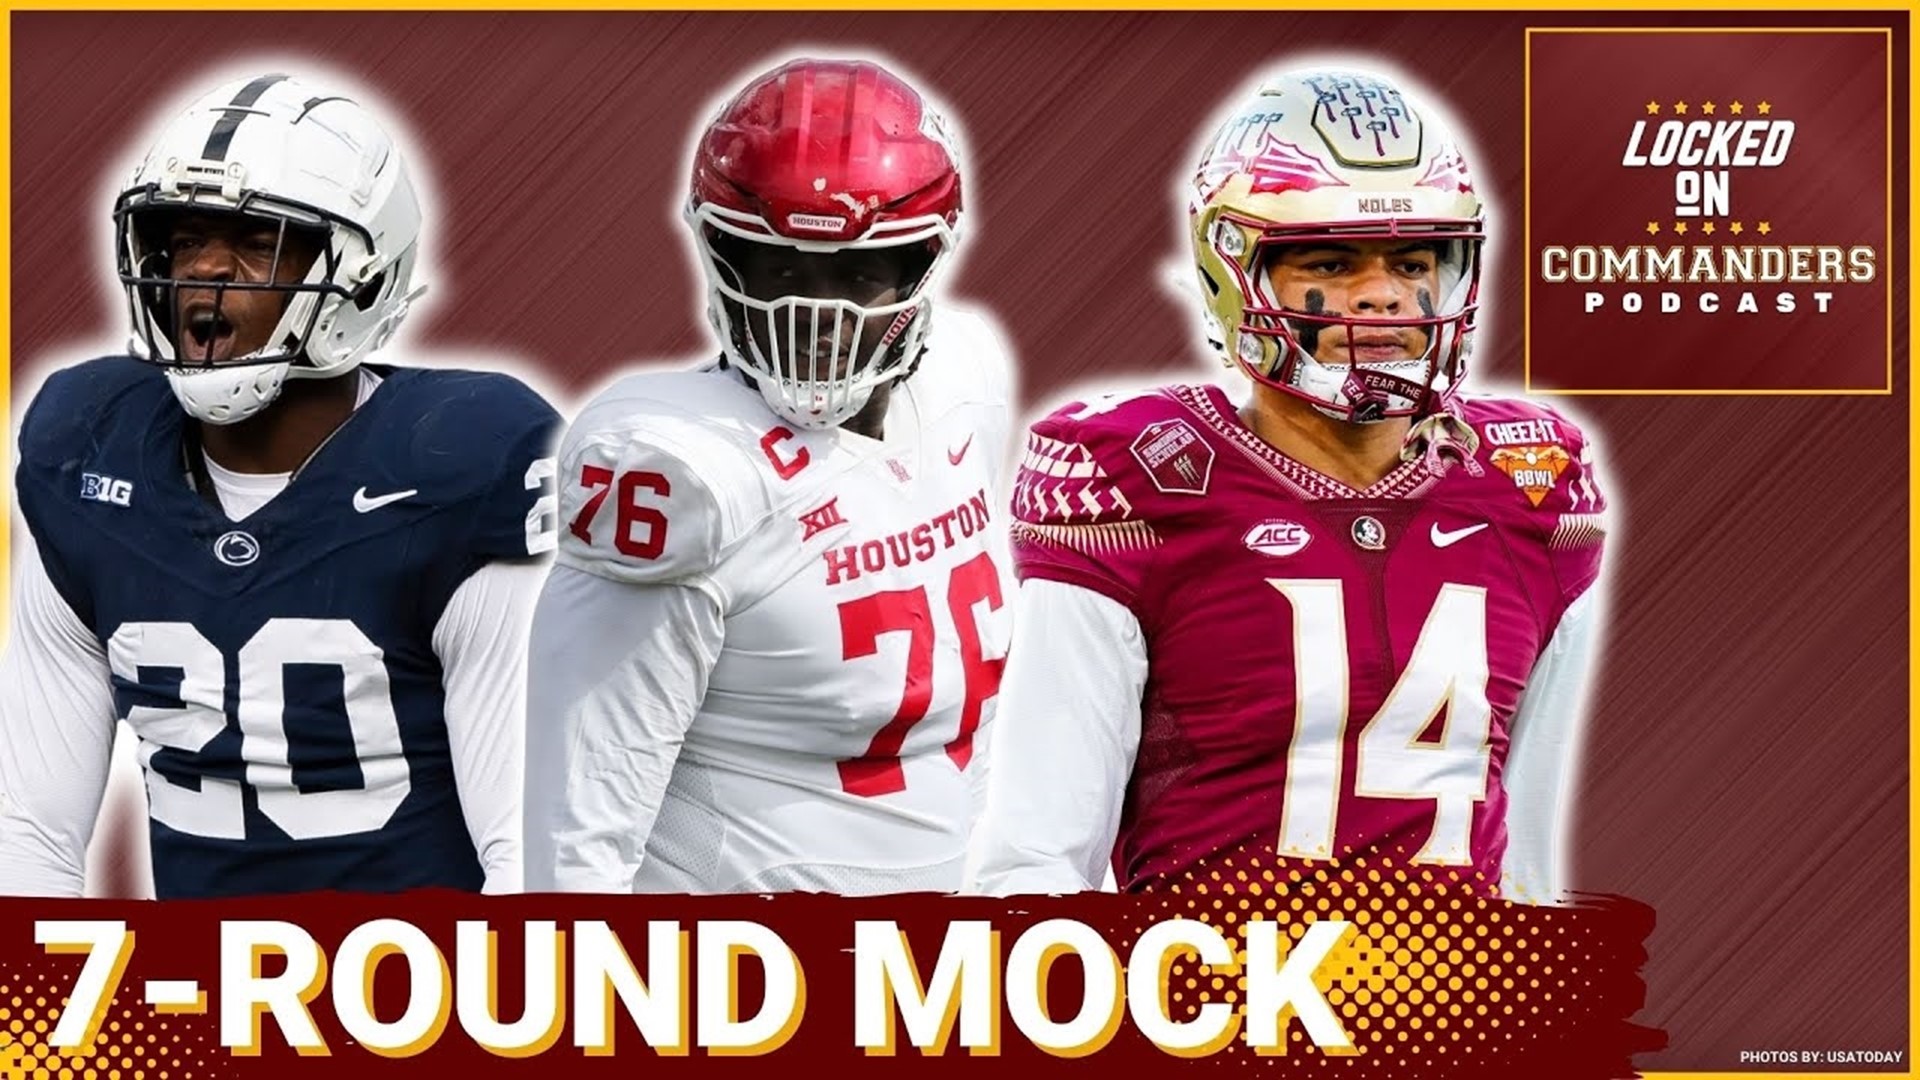 Rounding out our Washington Commanders 7-Round mock NFL Draft and discussing the team's approach to Top 30 visits.